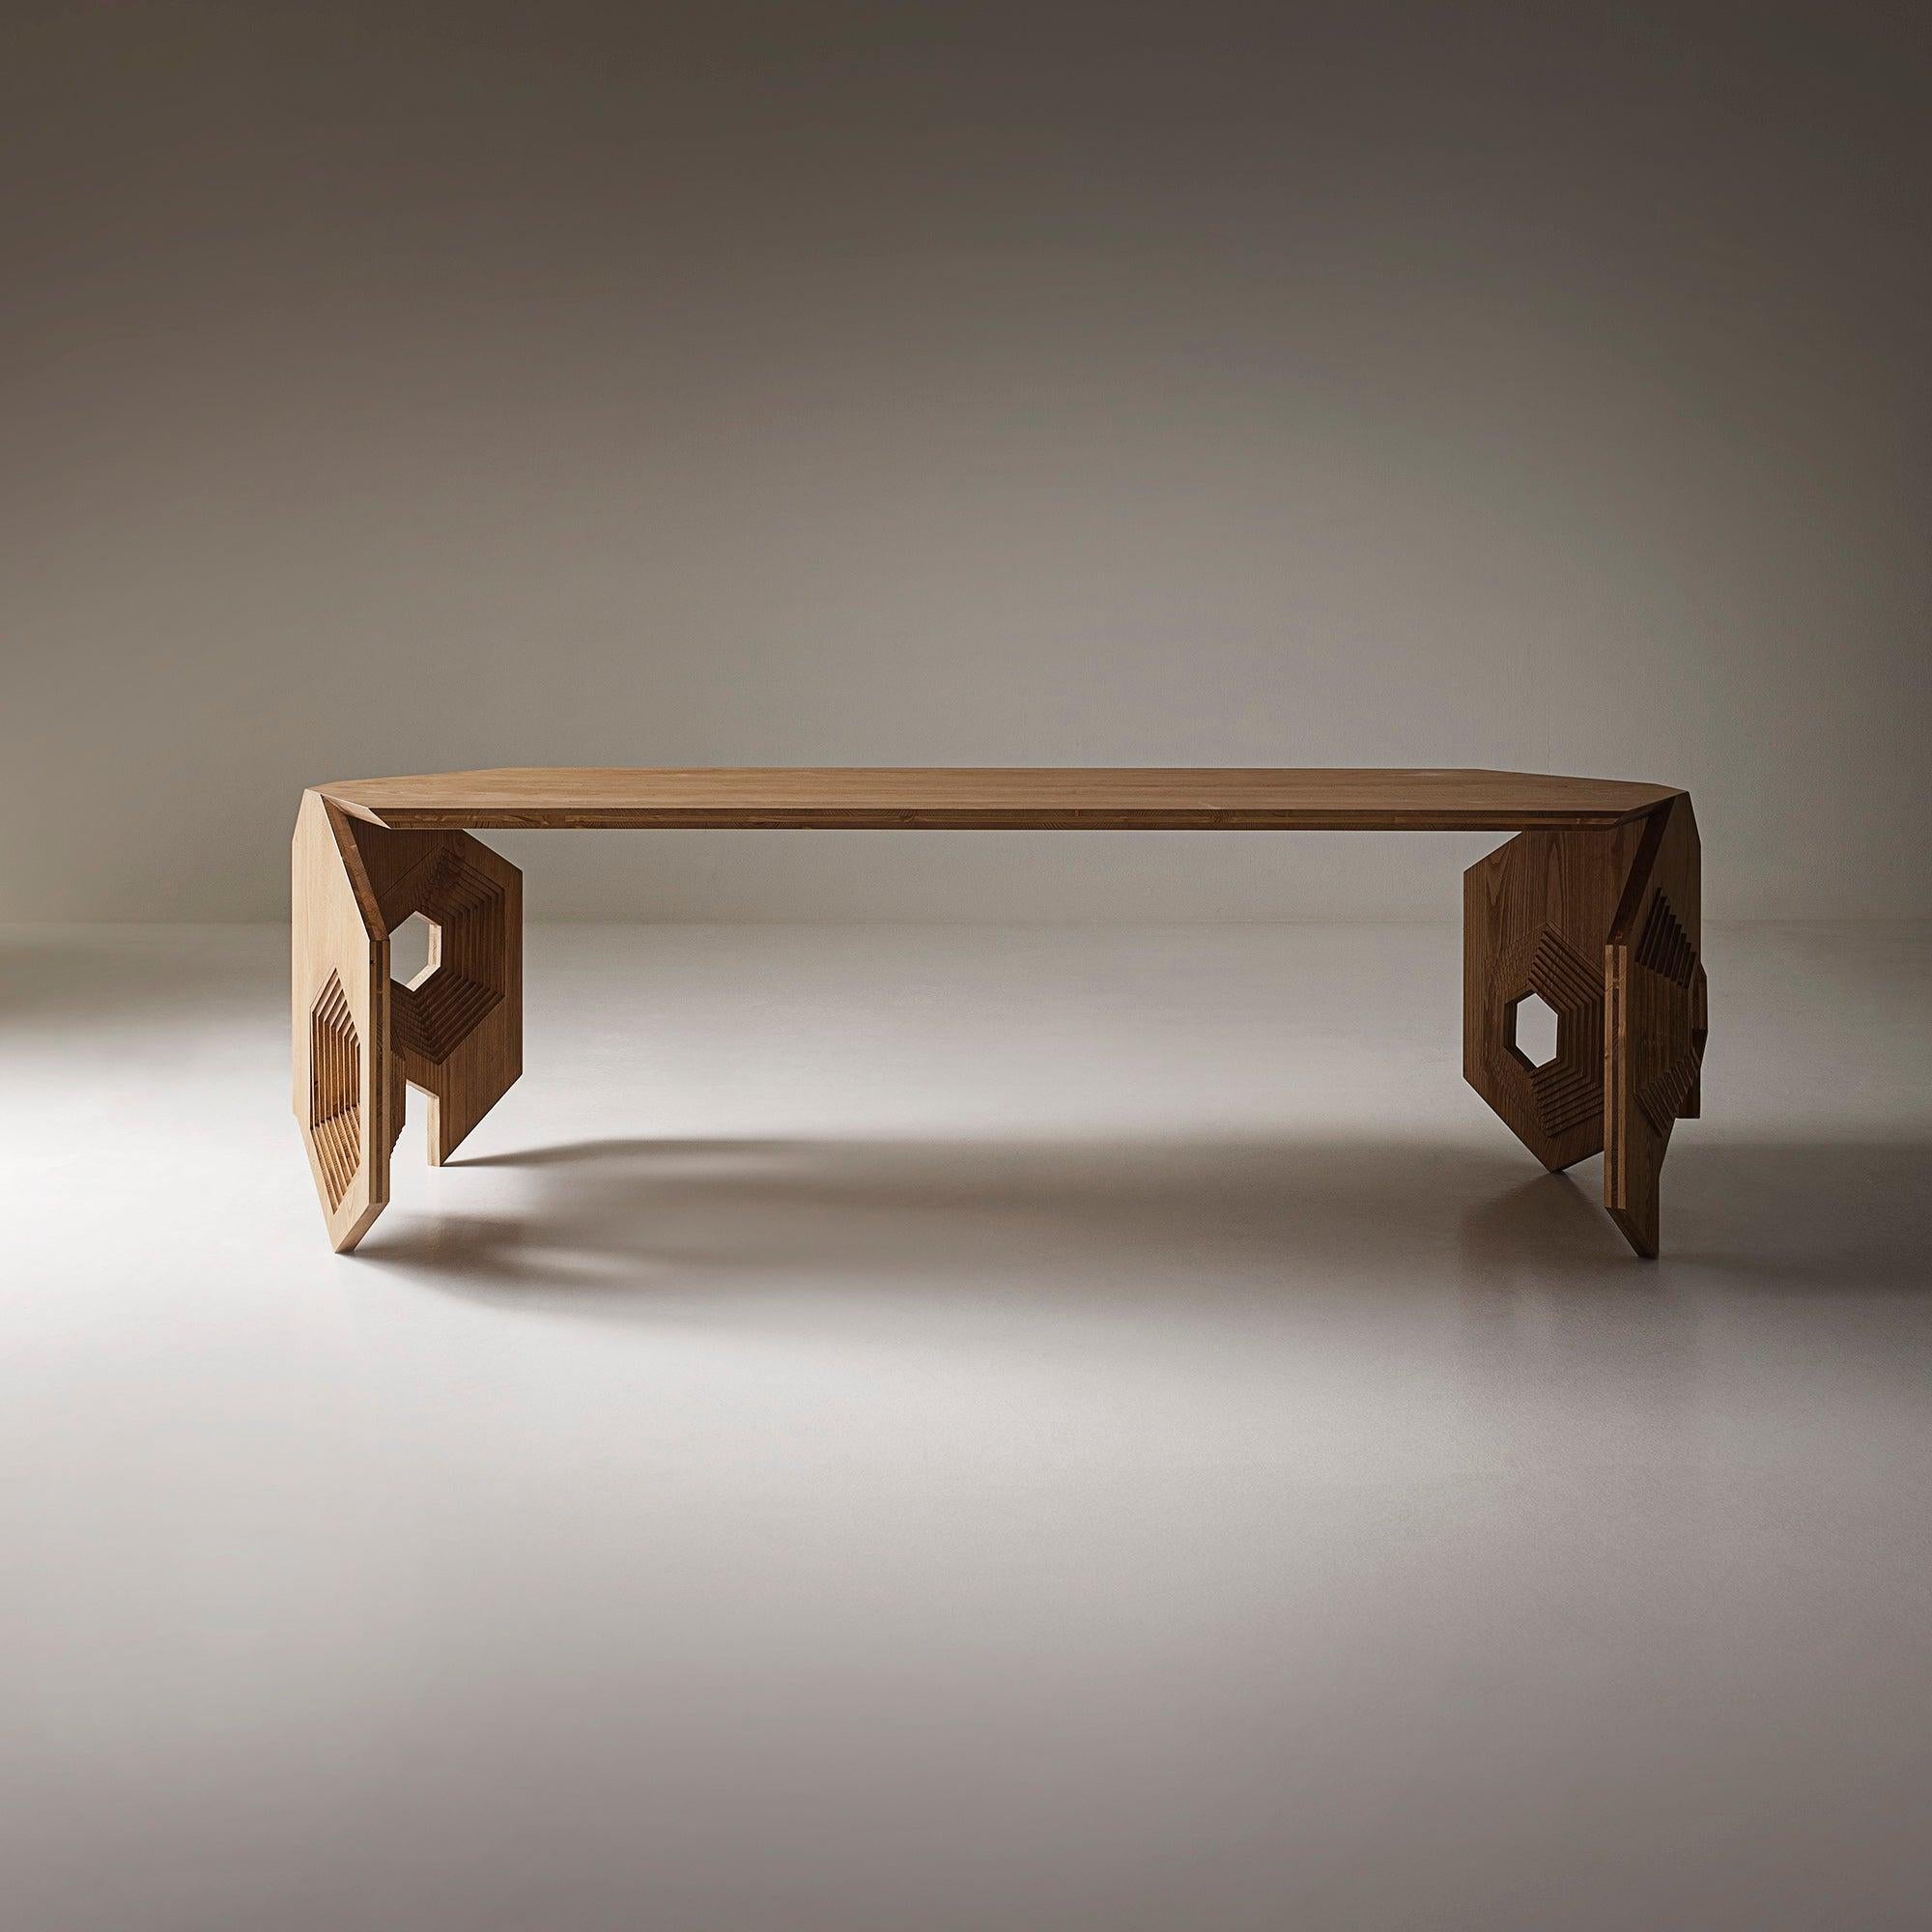 Cristoforo, with all its facets, well interprets the spirit of a free space and time traveller.
This sculptural and precious wood table is completely handcrafted in Italy by excellent artisans.
The processing that gives shape to the legs is an